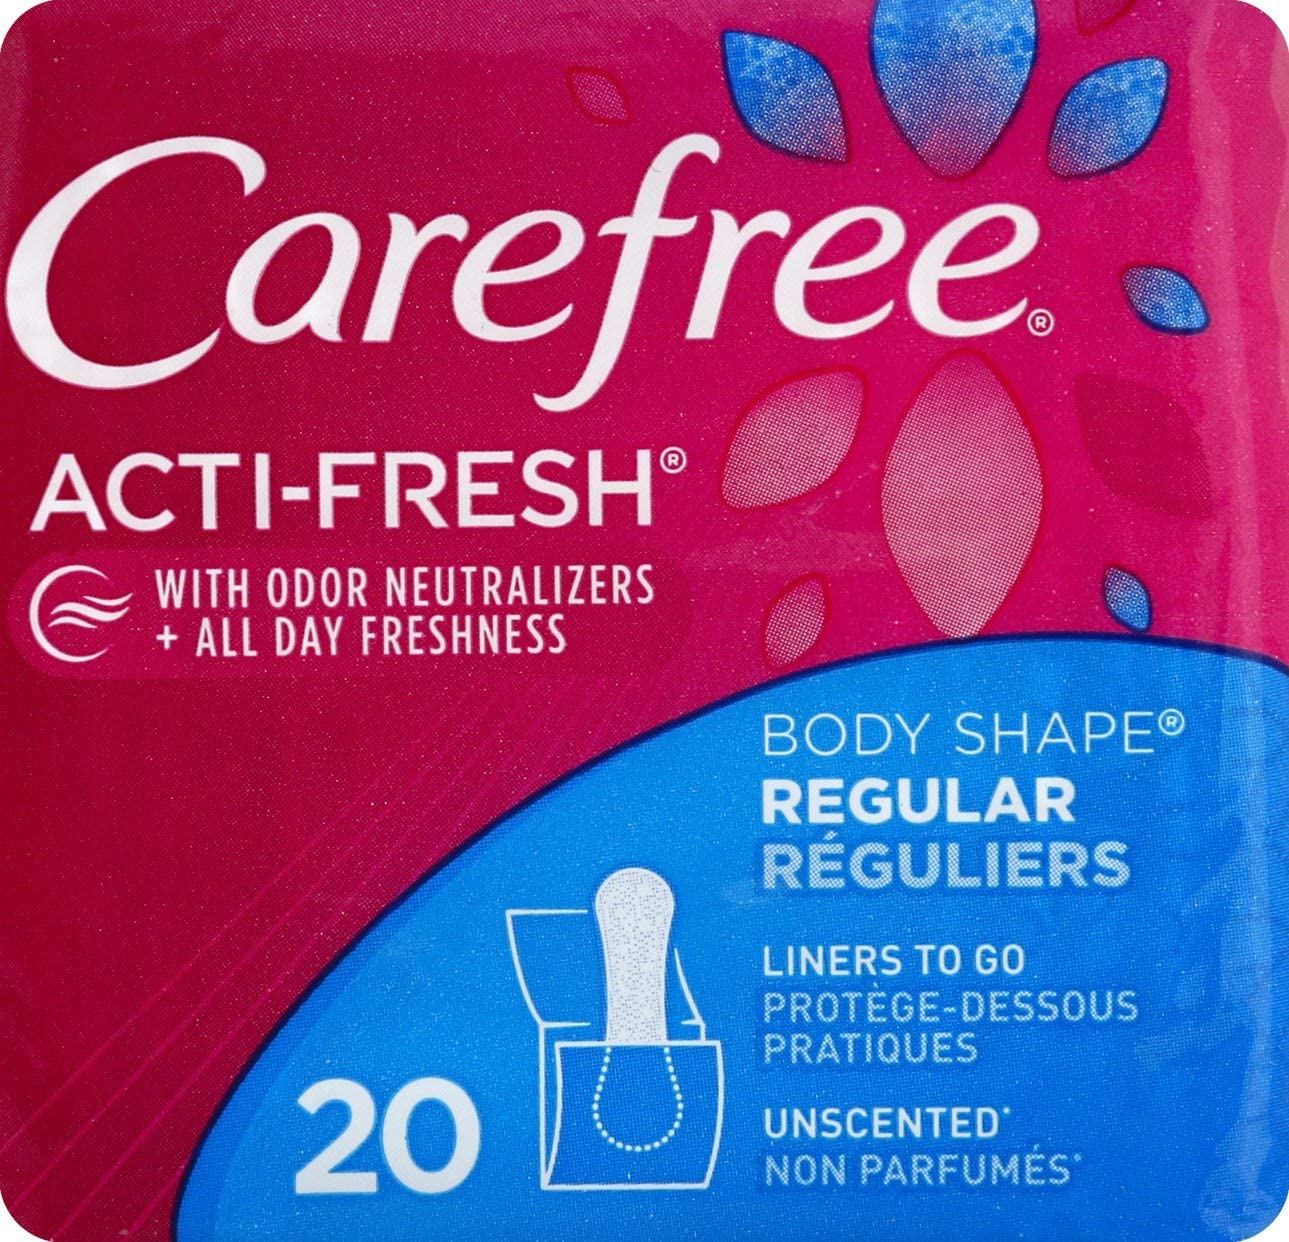 Buy Carefree Acti-Fresh Body Shape Liners, Unscented Pantyliner